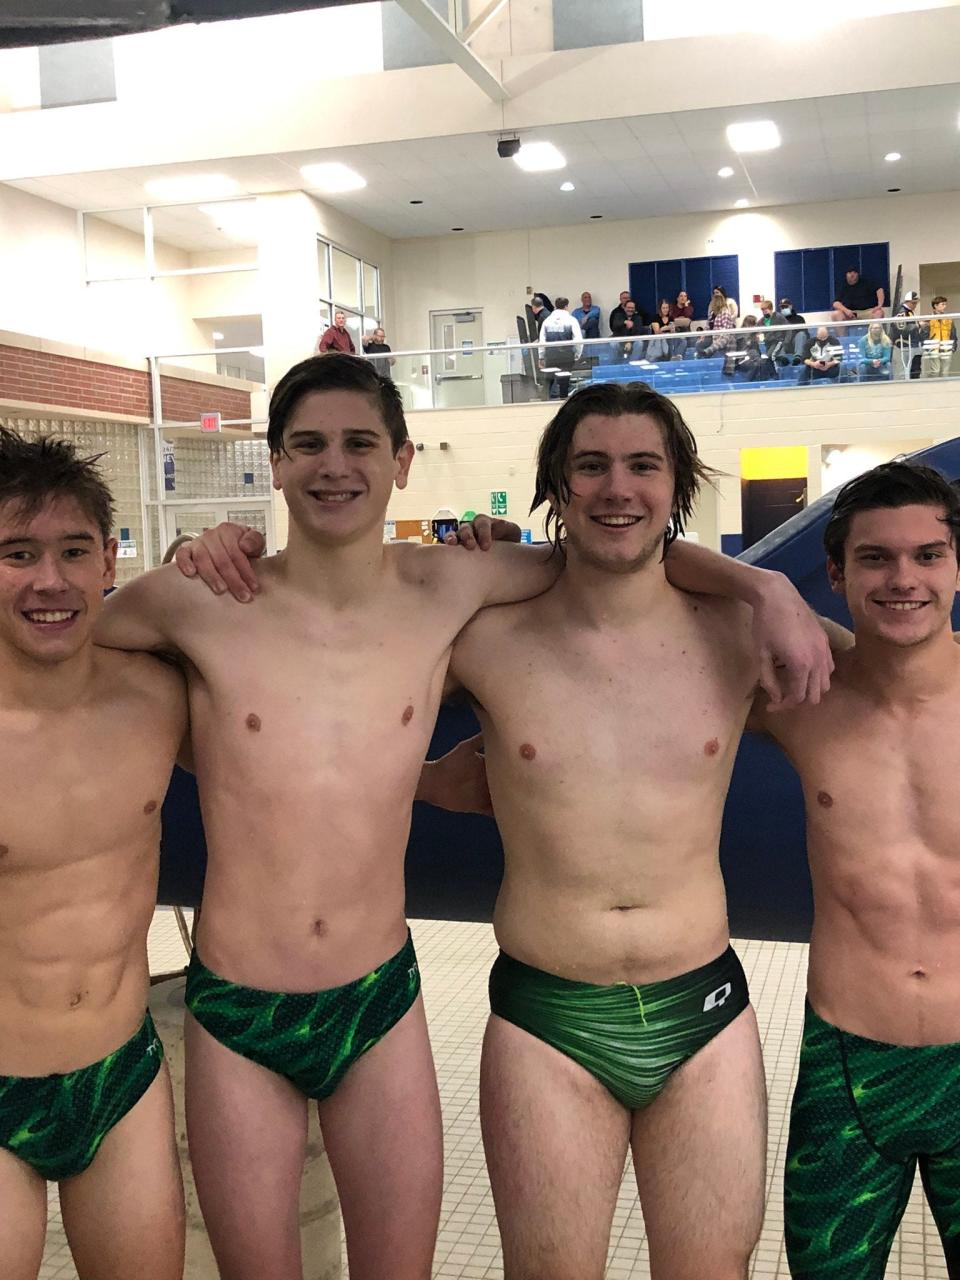 Aurora swimmers Andy Ploskunak, Cameron Good, Max Bailey and Nate New.